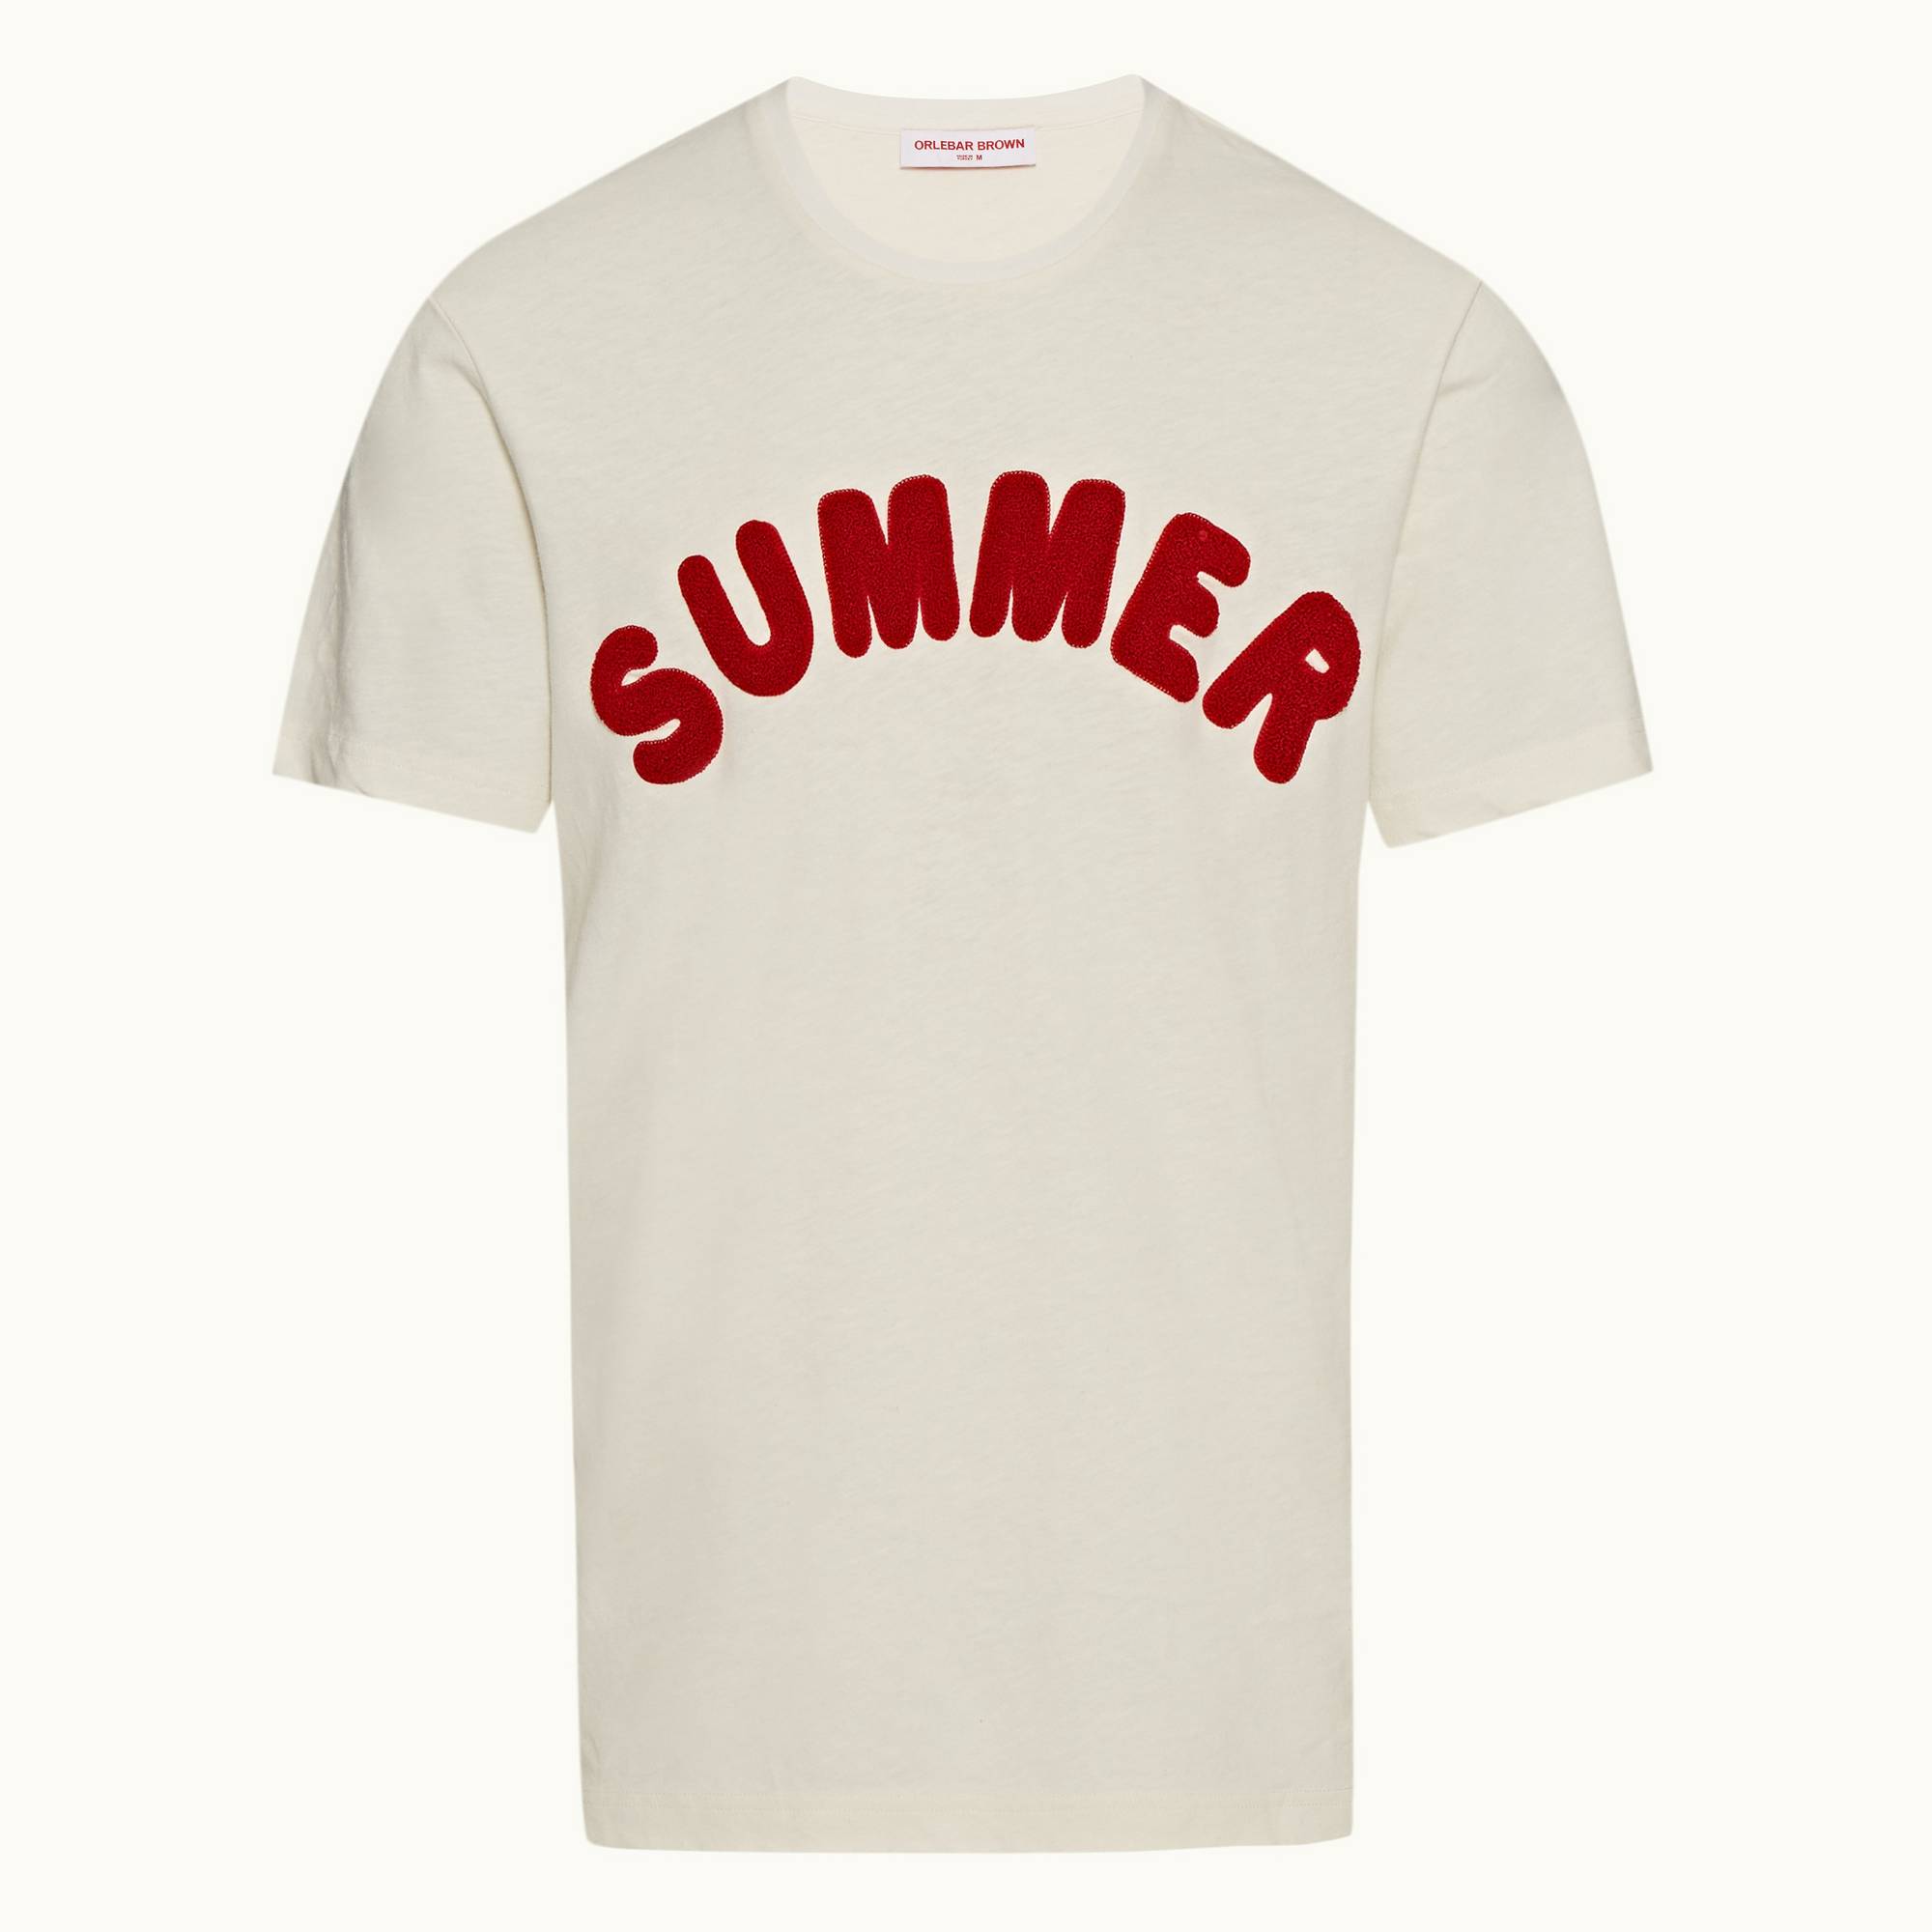 Nicolas Towelling - Mens White Sand/Summer Red 'Summer' Relaxed Fit T-shirt